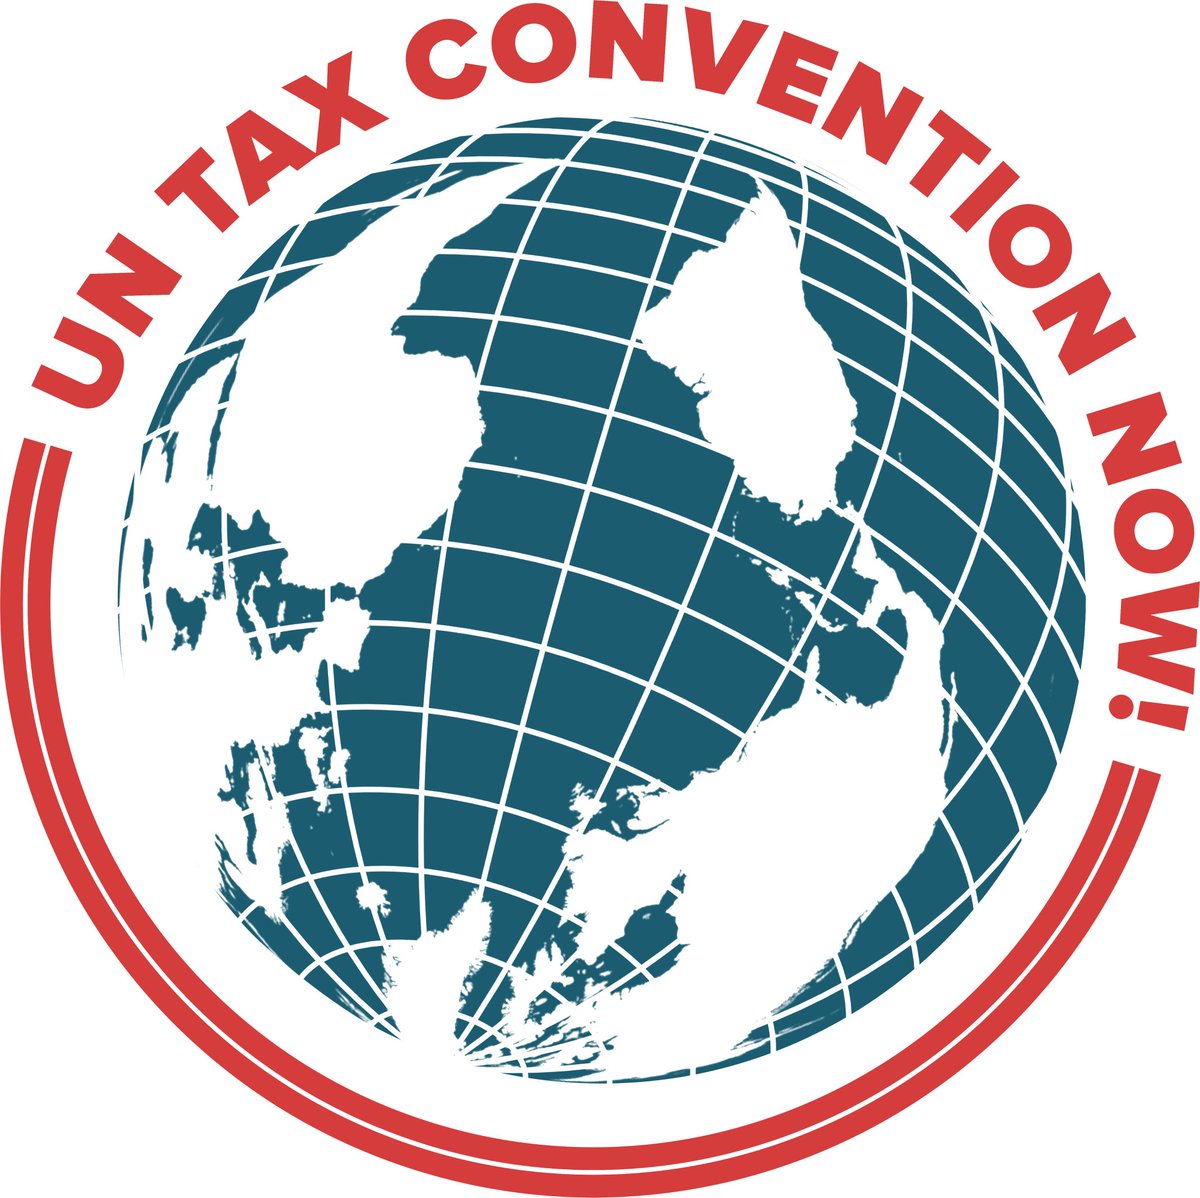 🌐Today, the @UN will hold a vote to decide whether to initiate the negotiation of a #UNTaxConvention to strengthen intl #TaxCooperation 

📰In response to the vote, we will organise an online press conference at 12 pm New York time

➡️Read more from: globaltaxjustice.org/news/historic-…